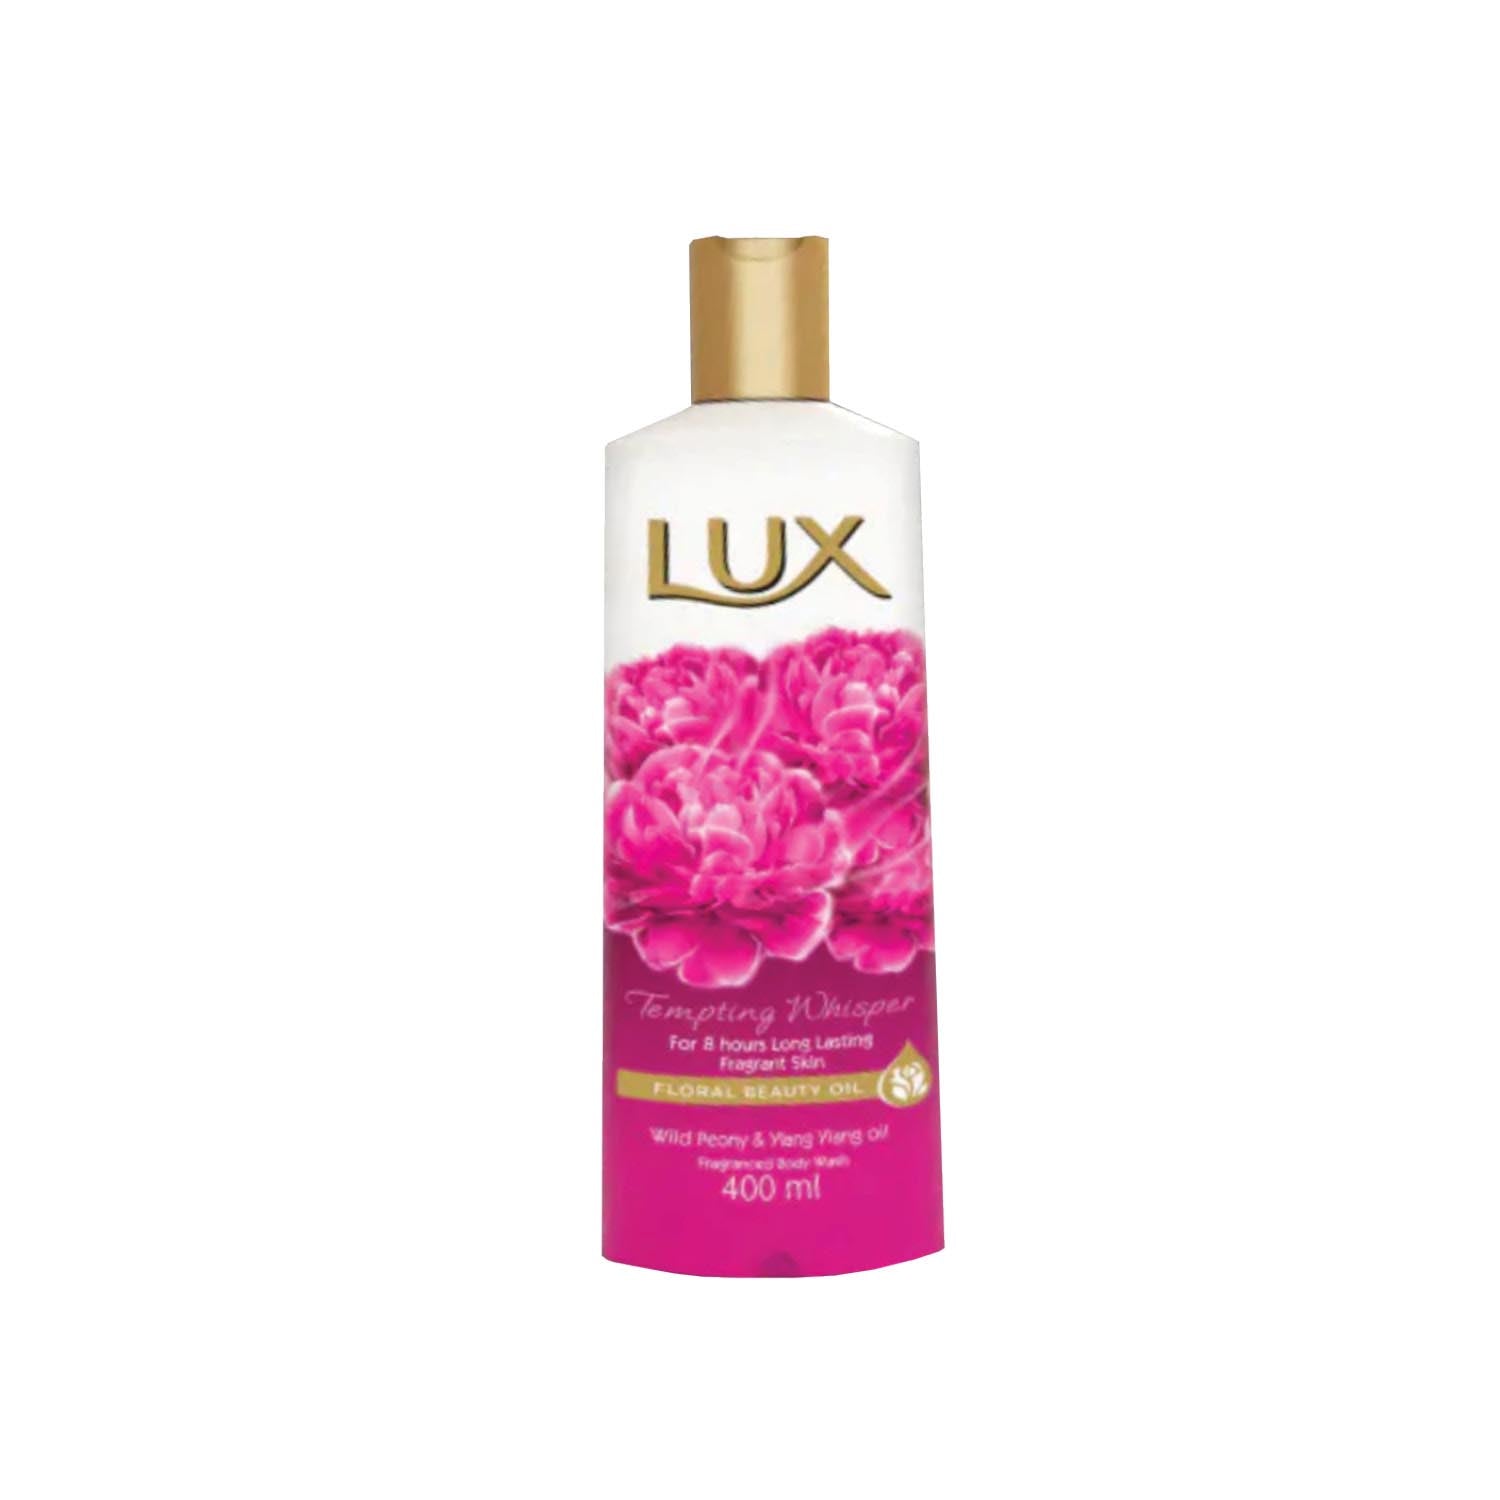 Lux Body Wash Assorted, 400ml